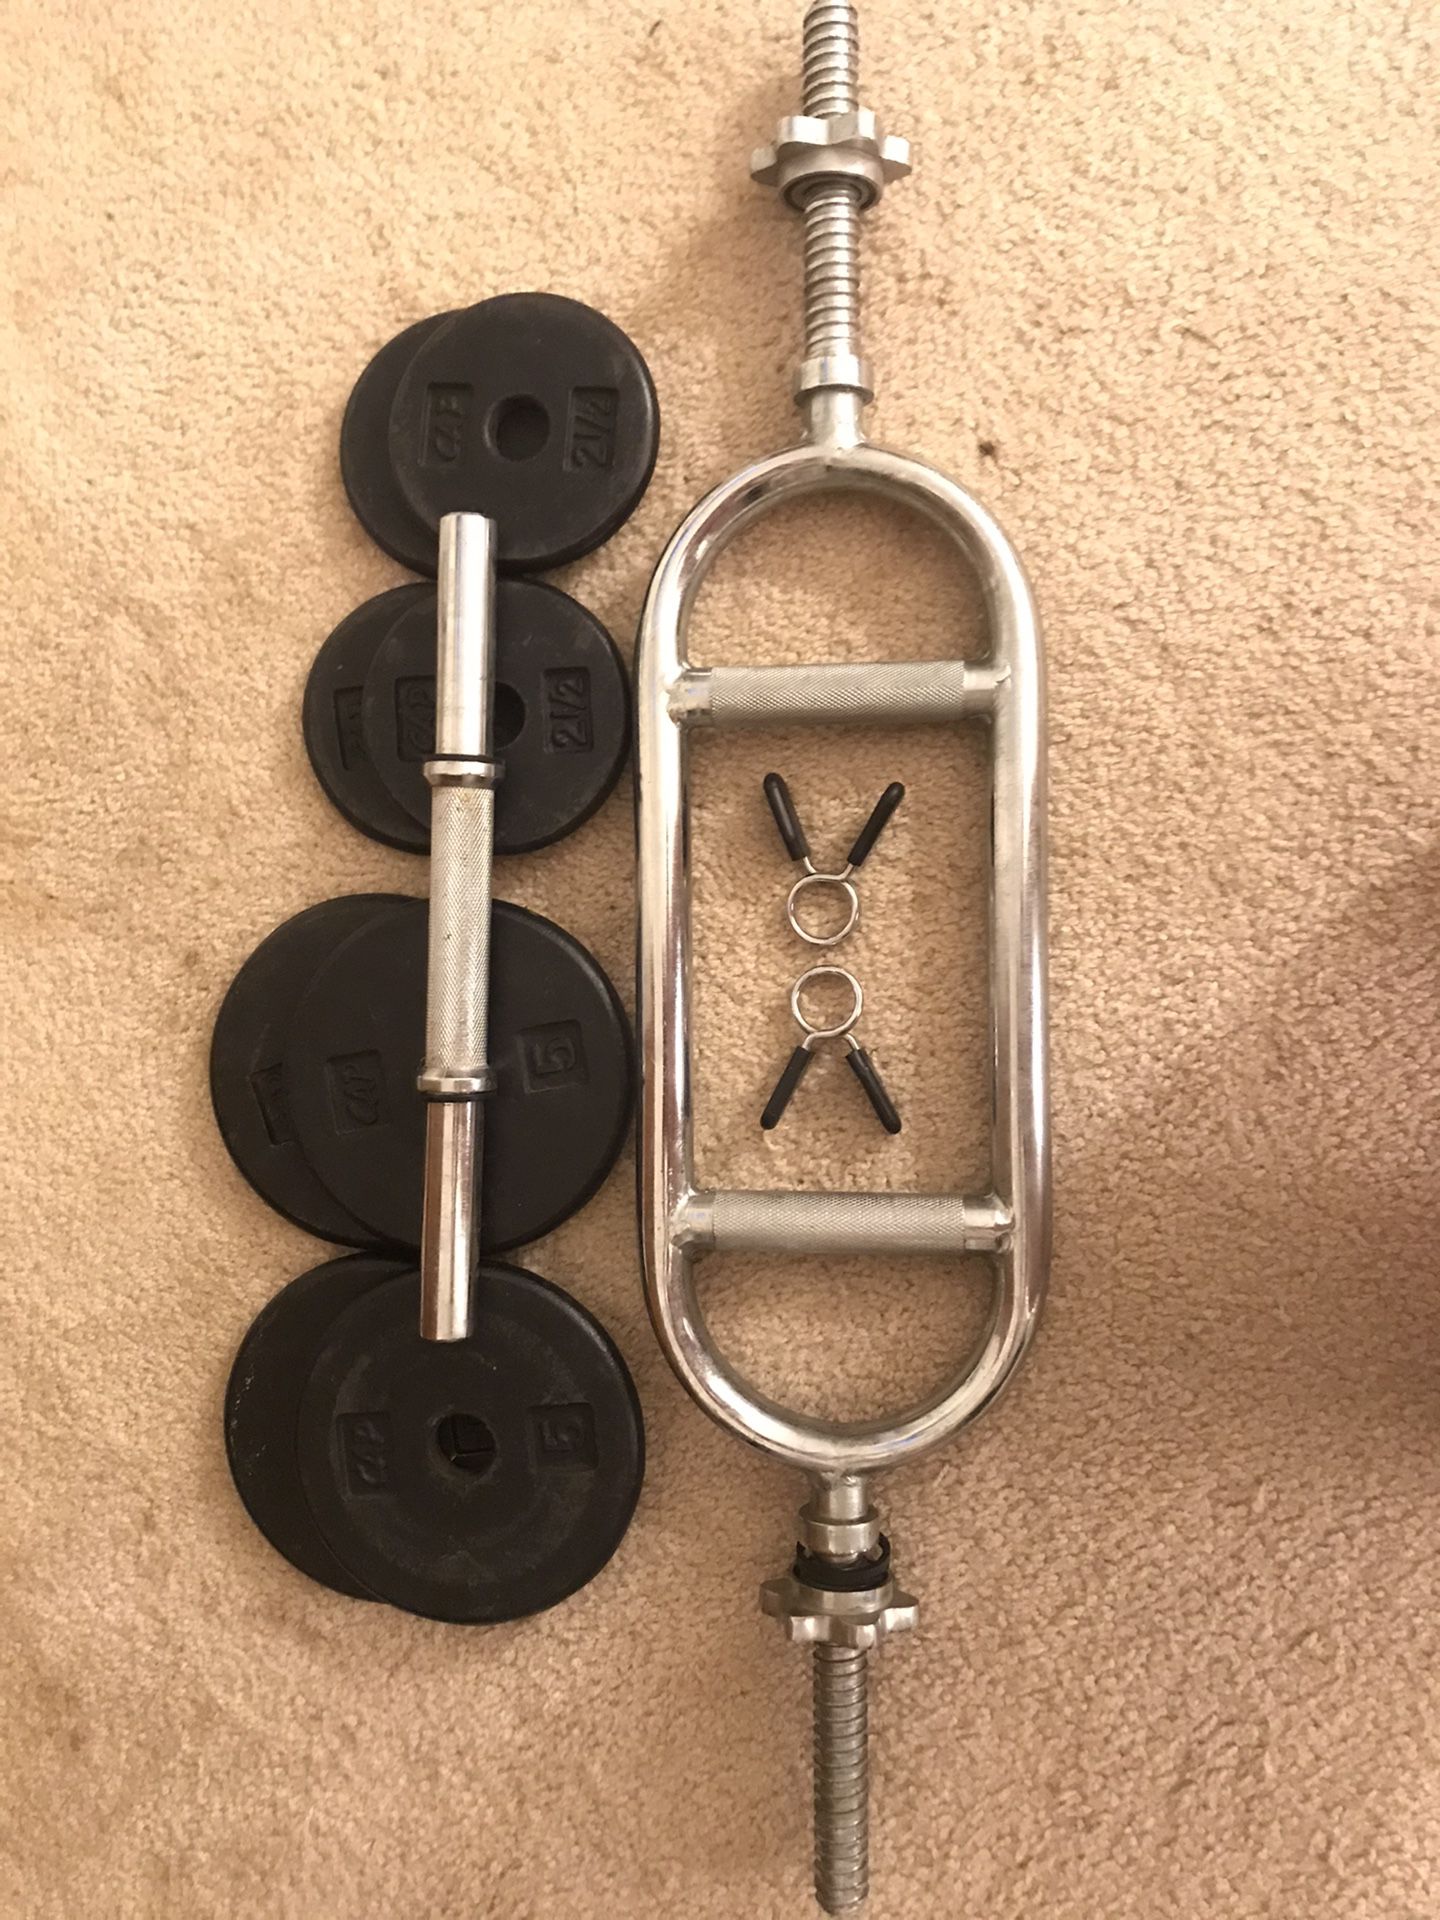 Tricep lift bar & dumbell with weights